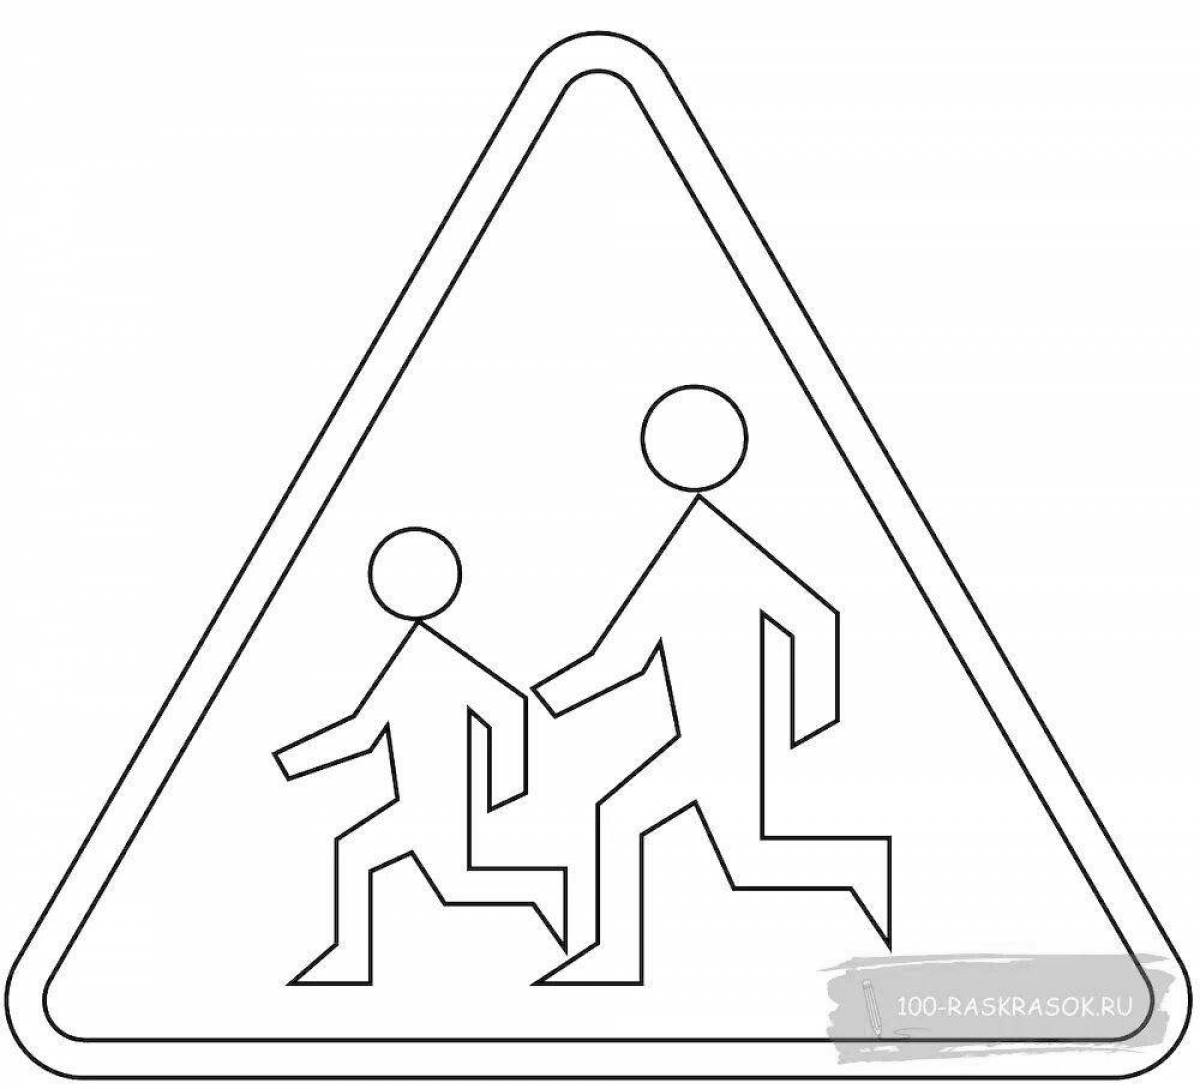 Colorful Caution Children Traffic Sign Coloring Page